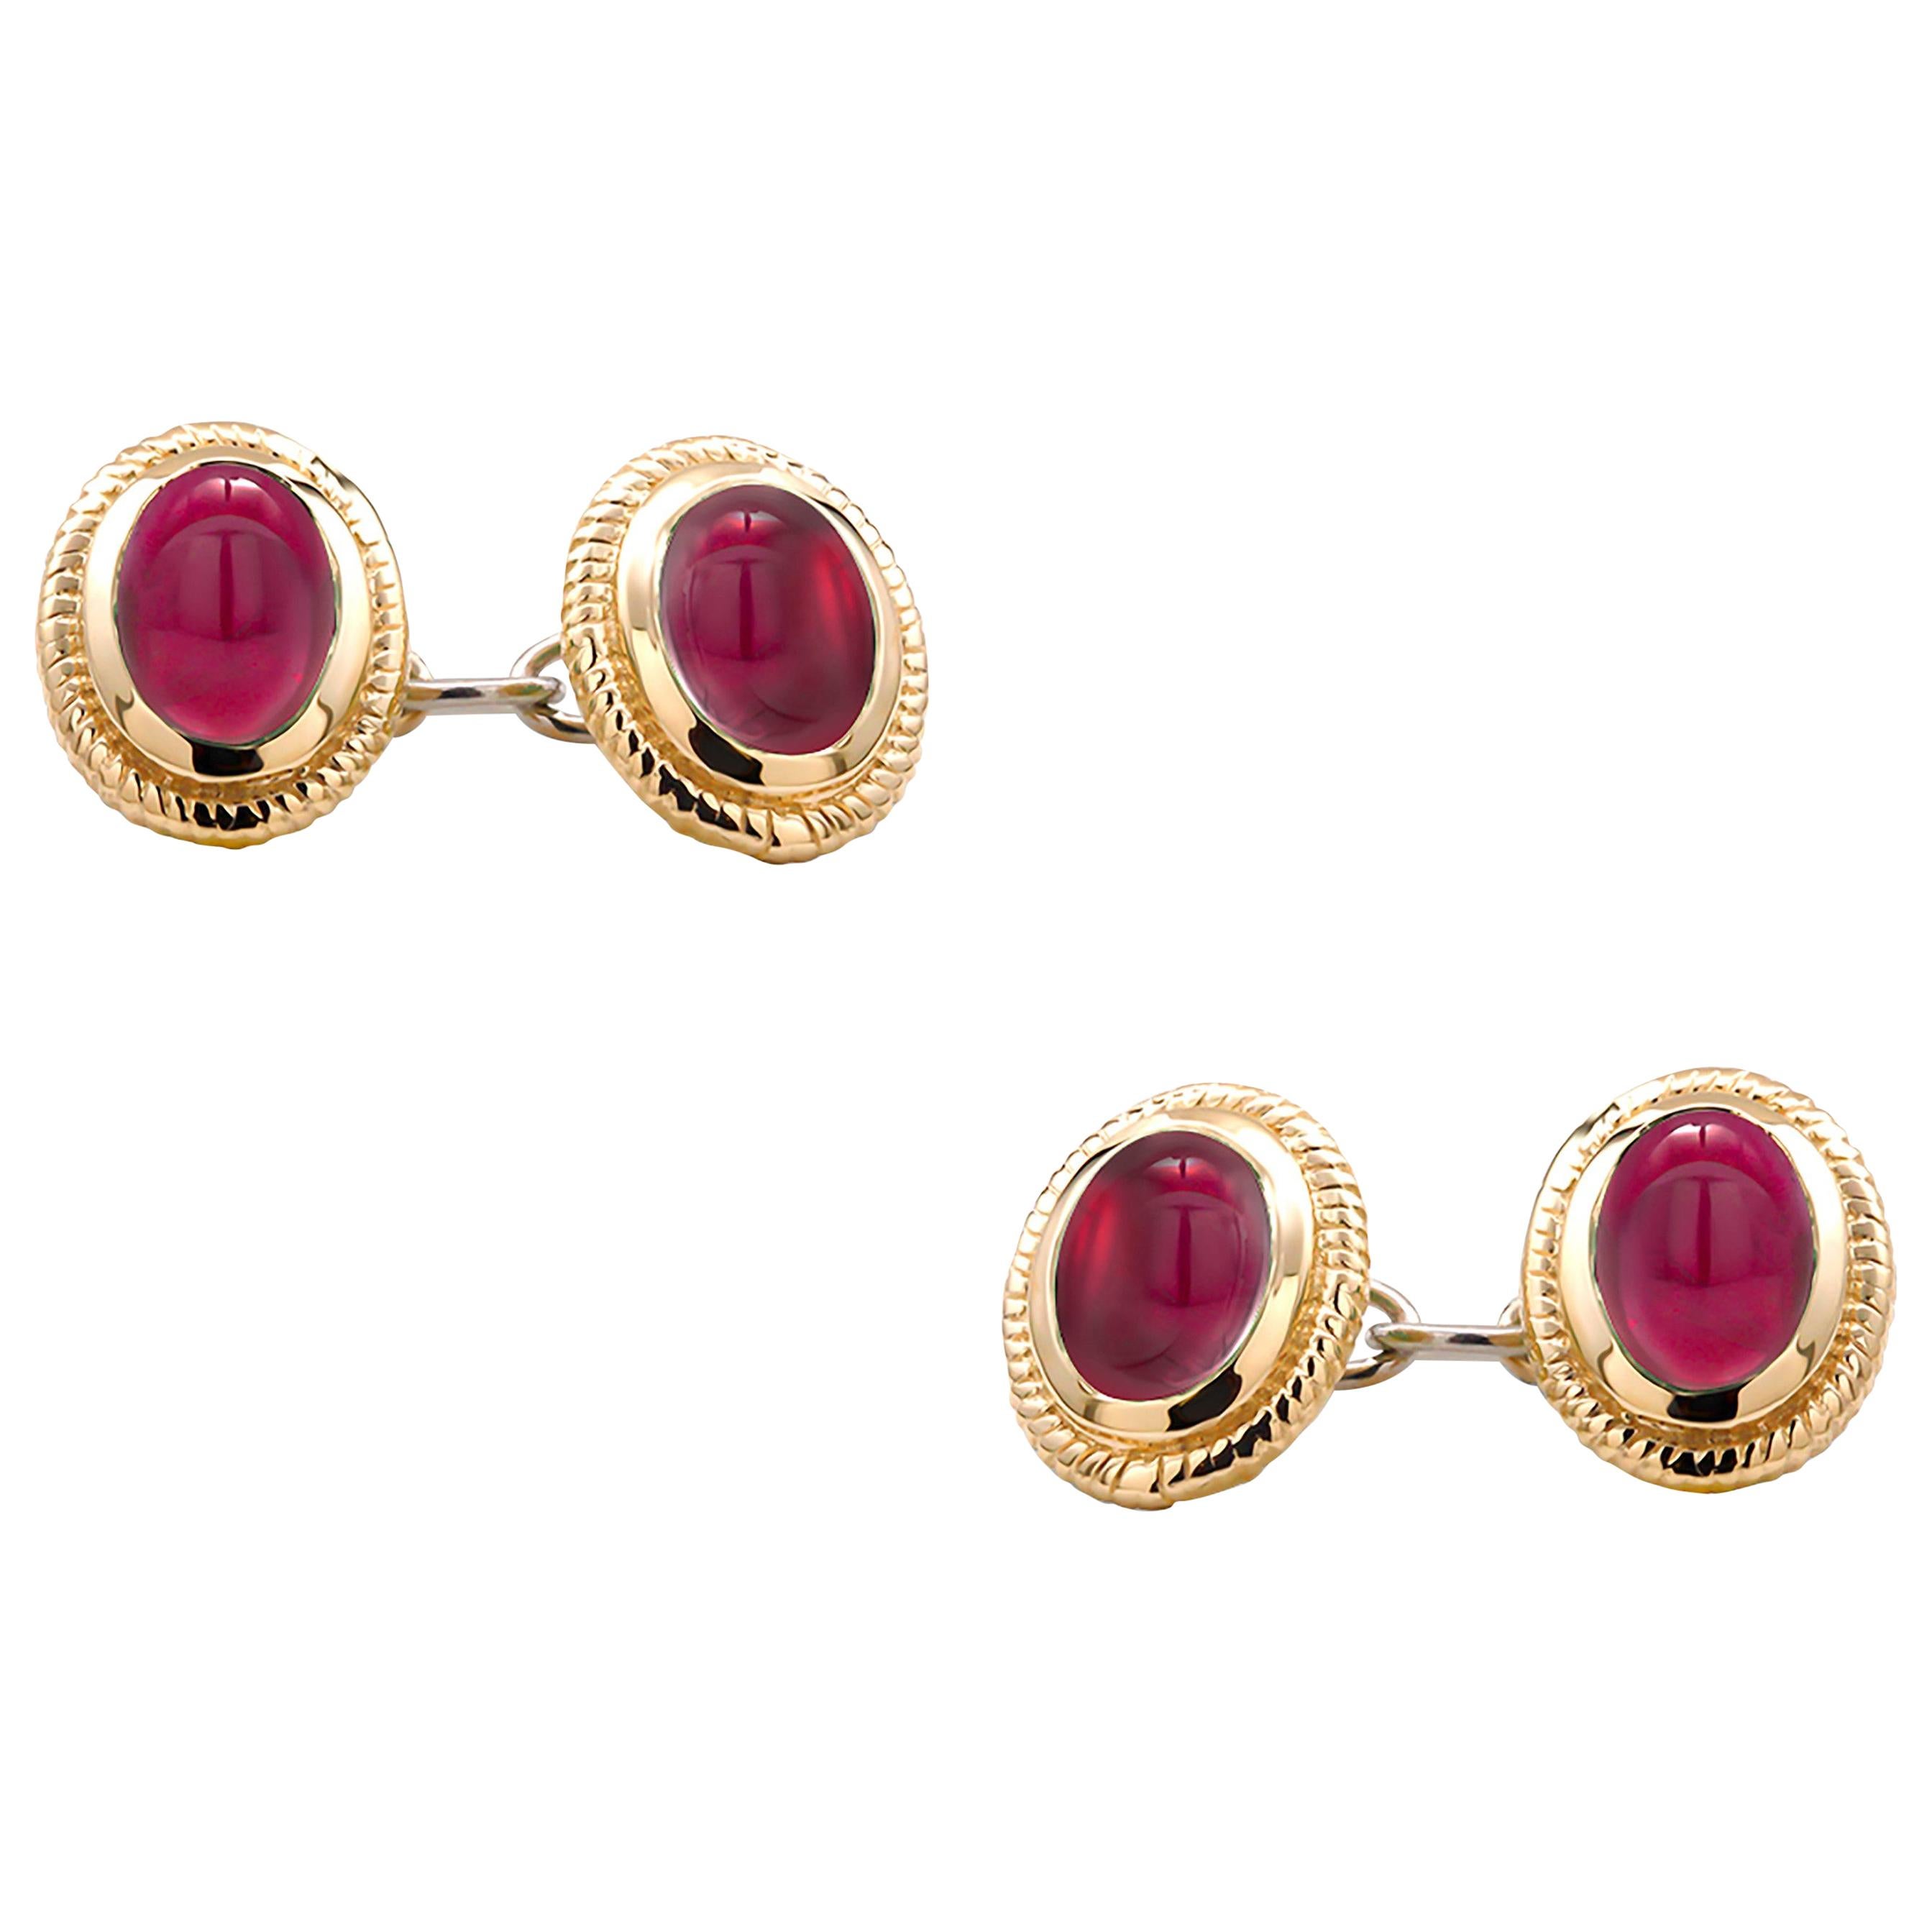 Matched Pair of Cabochon Ruby Double Sides Chain Link Cufflinks